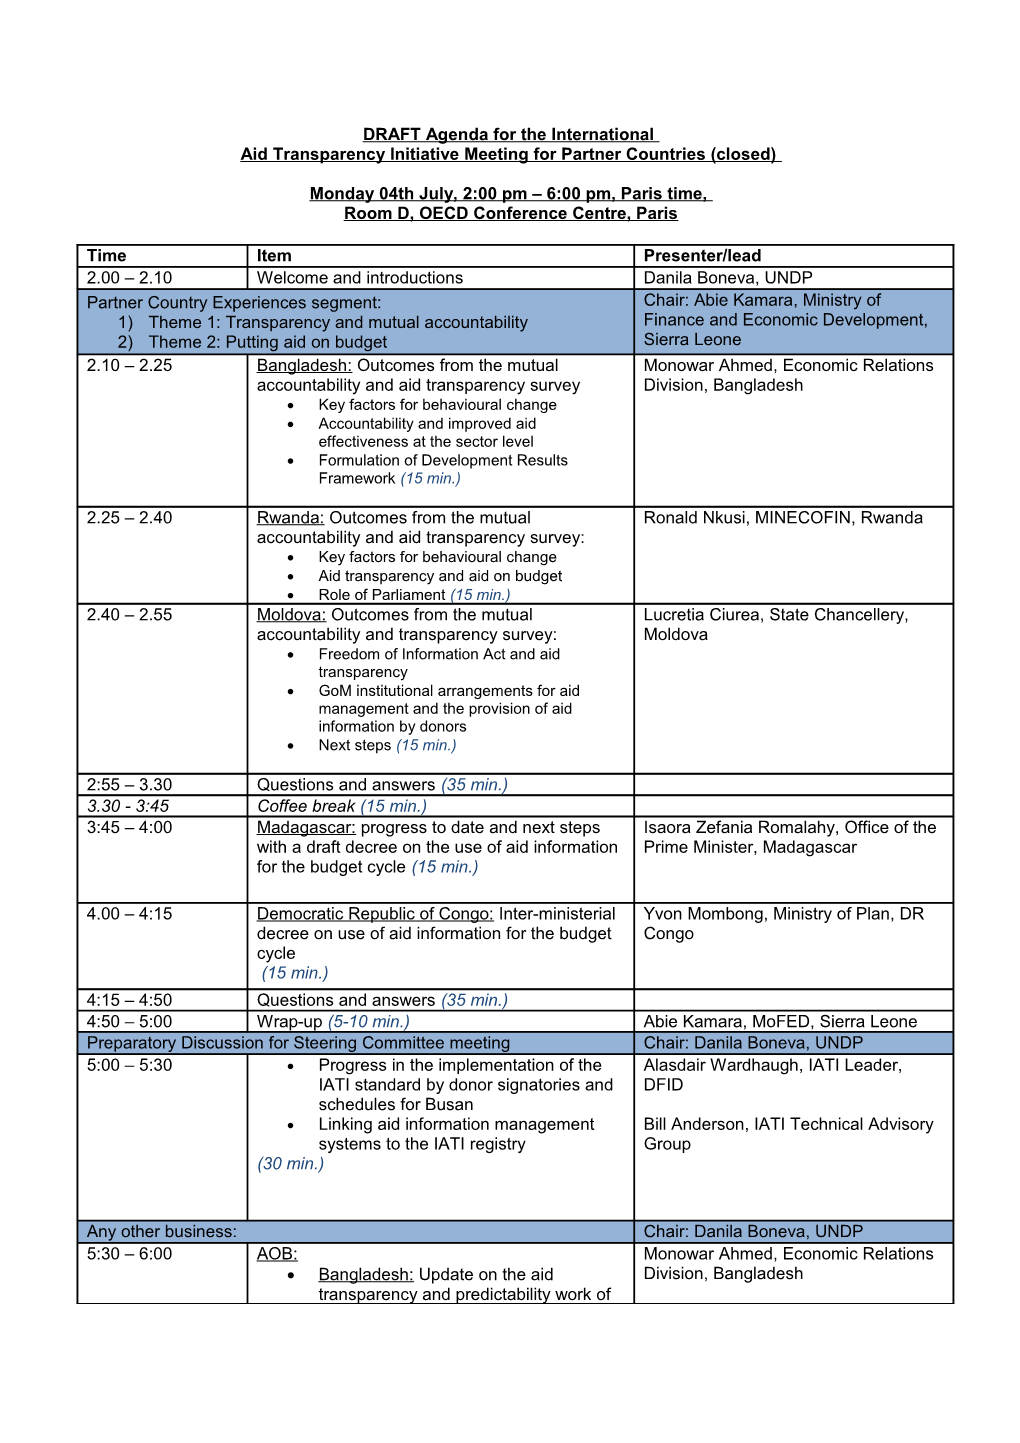 Agenda for the 5Th Steering Committee of the International Aid Transparency Initiative